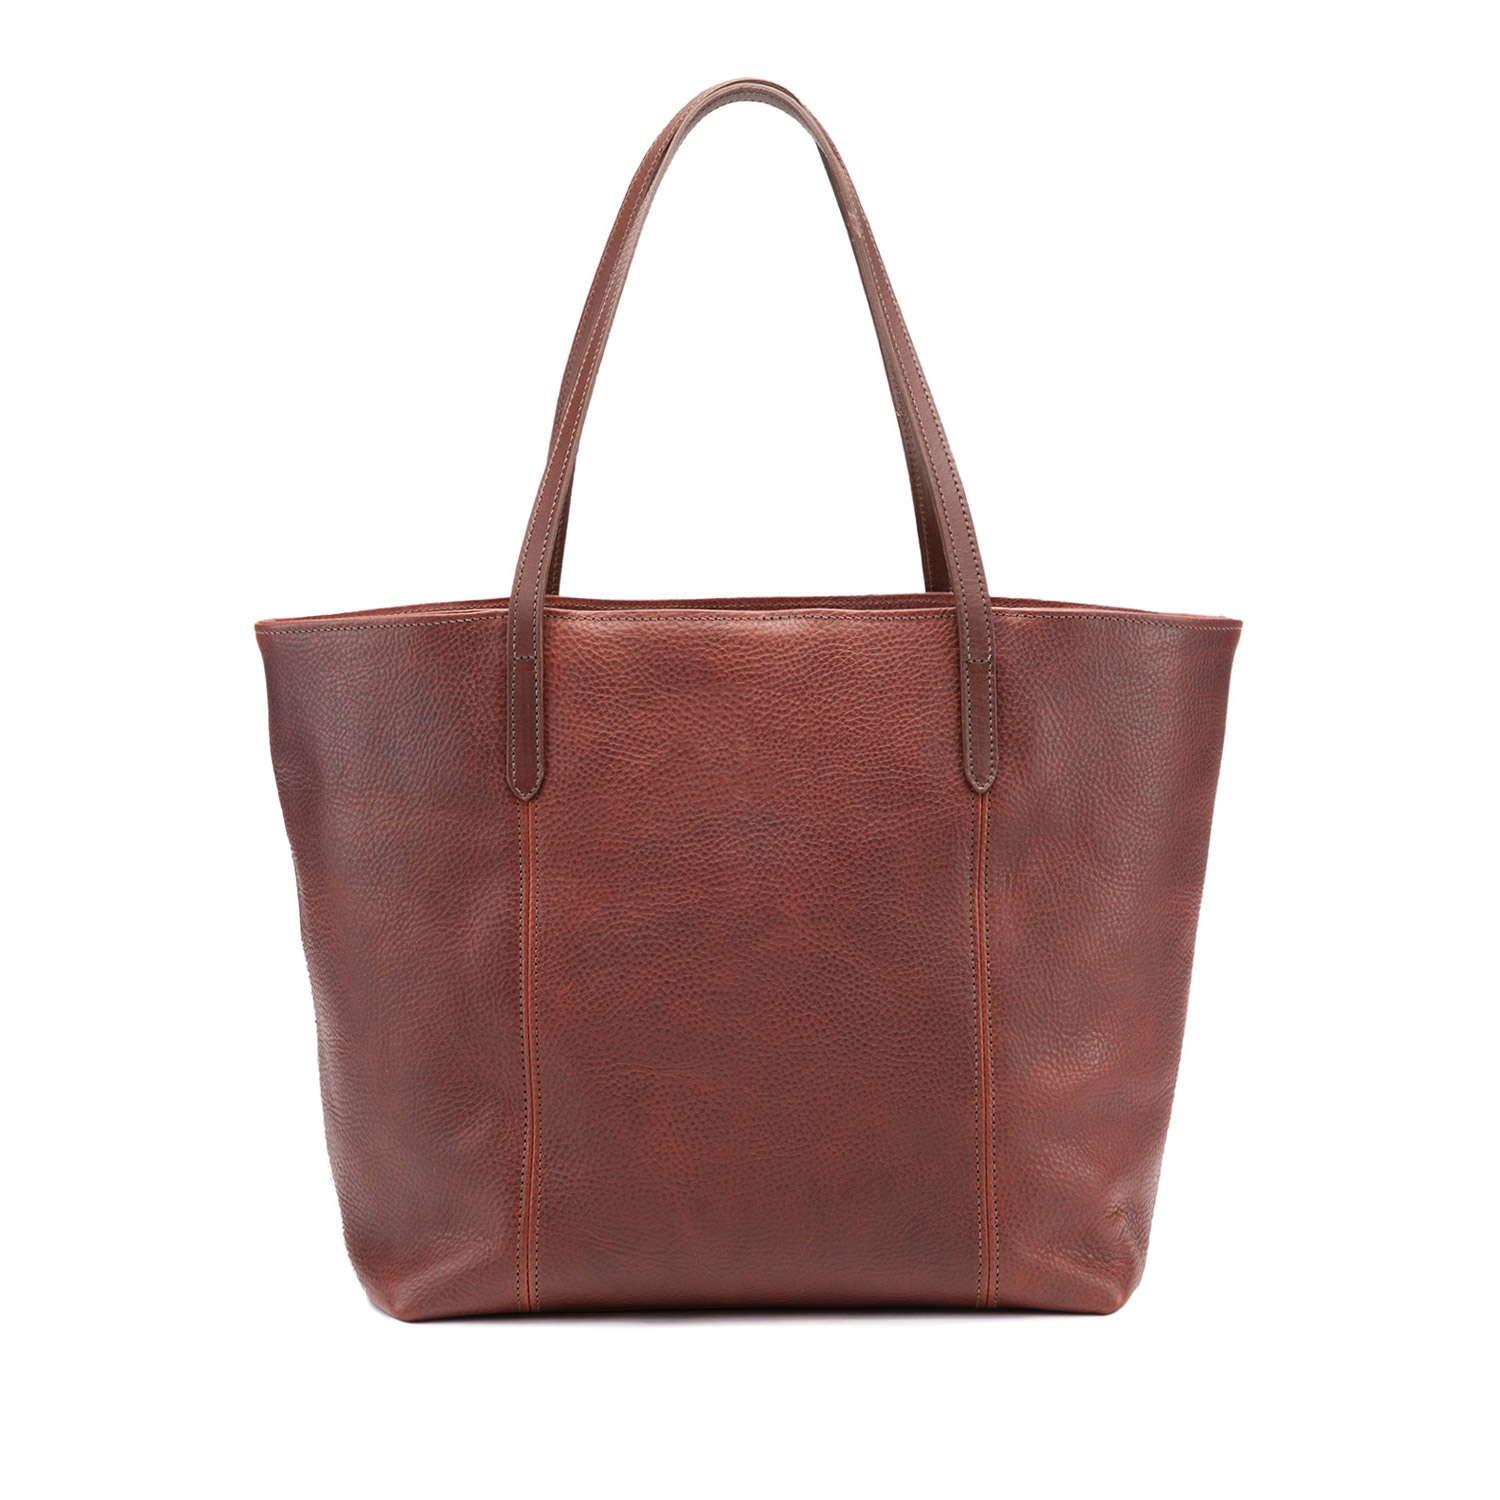 Banbury Luxury Leather Tote Bag Made in England by Tusting